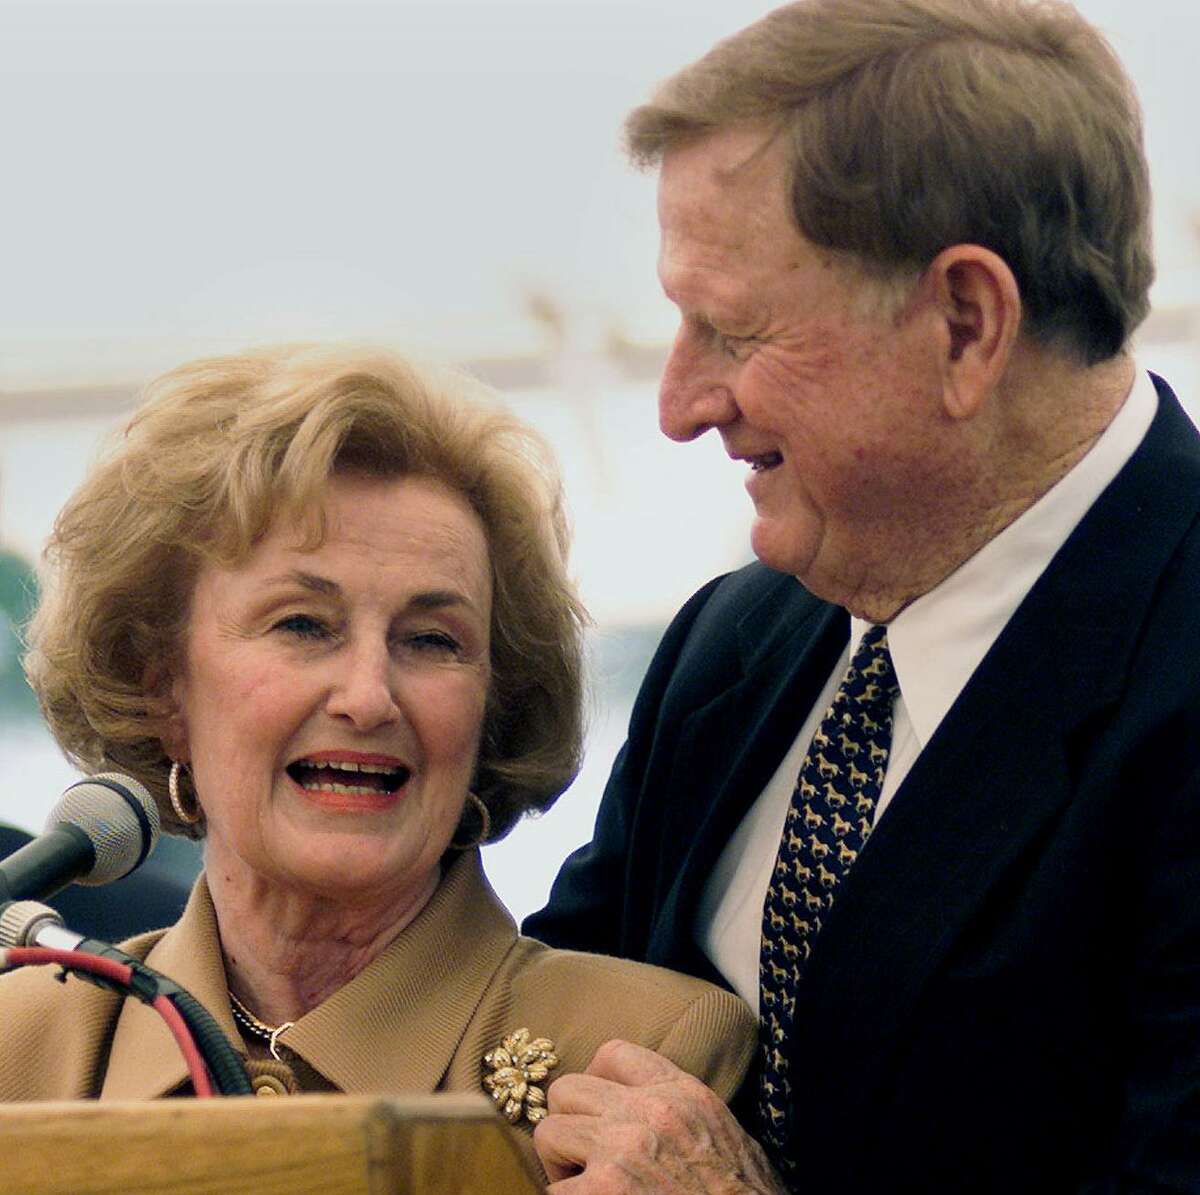 Charline McCombs, dedicated philanthropist and wife of billionaire businessman Red McCombs, passed away in December. Read more: 'We adored her': San Antonio eulogizes Charline McCombs